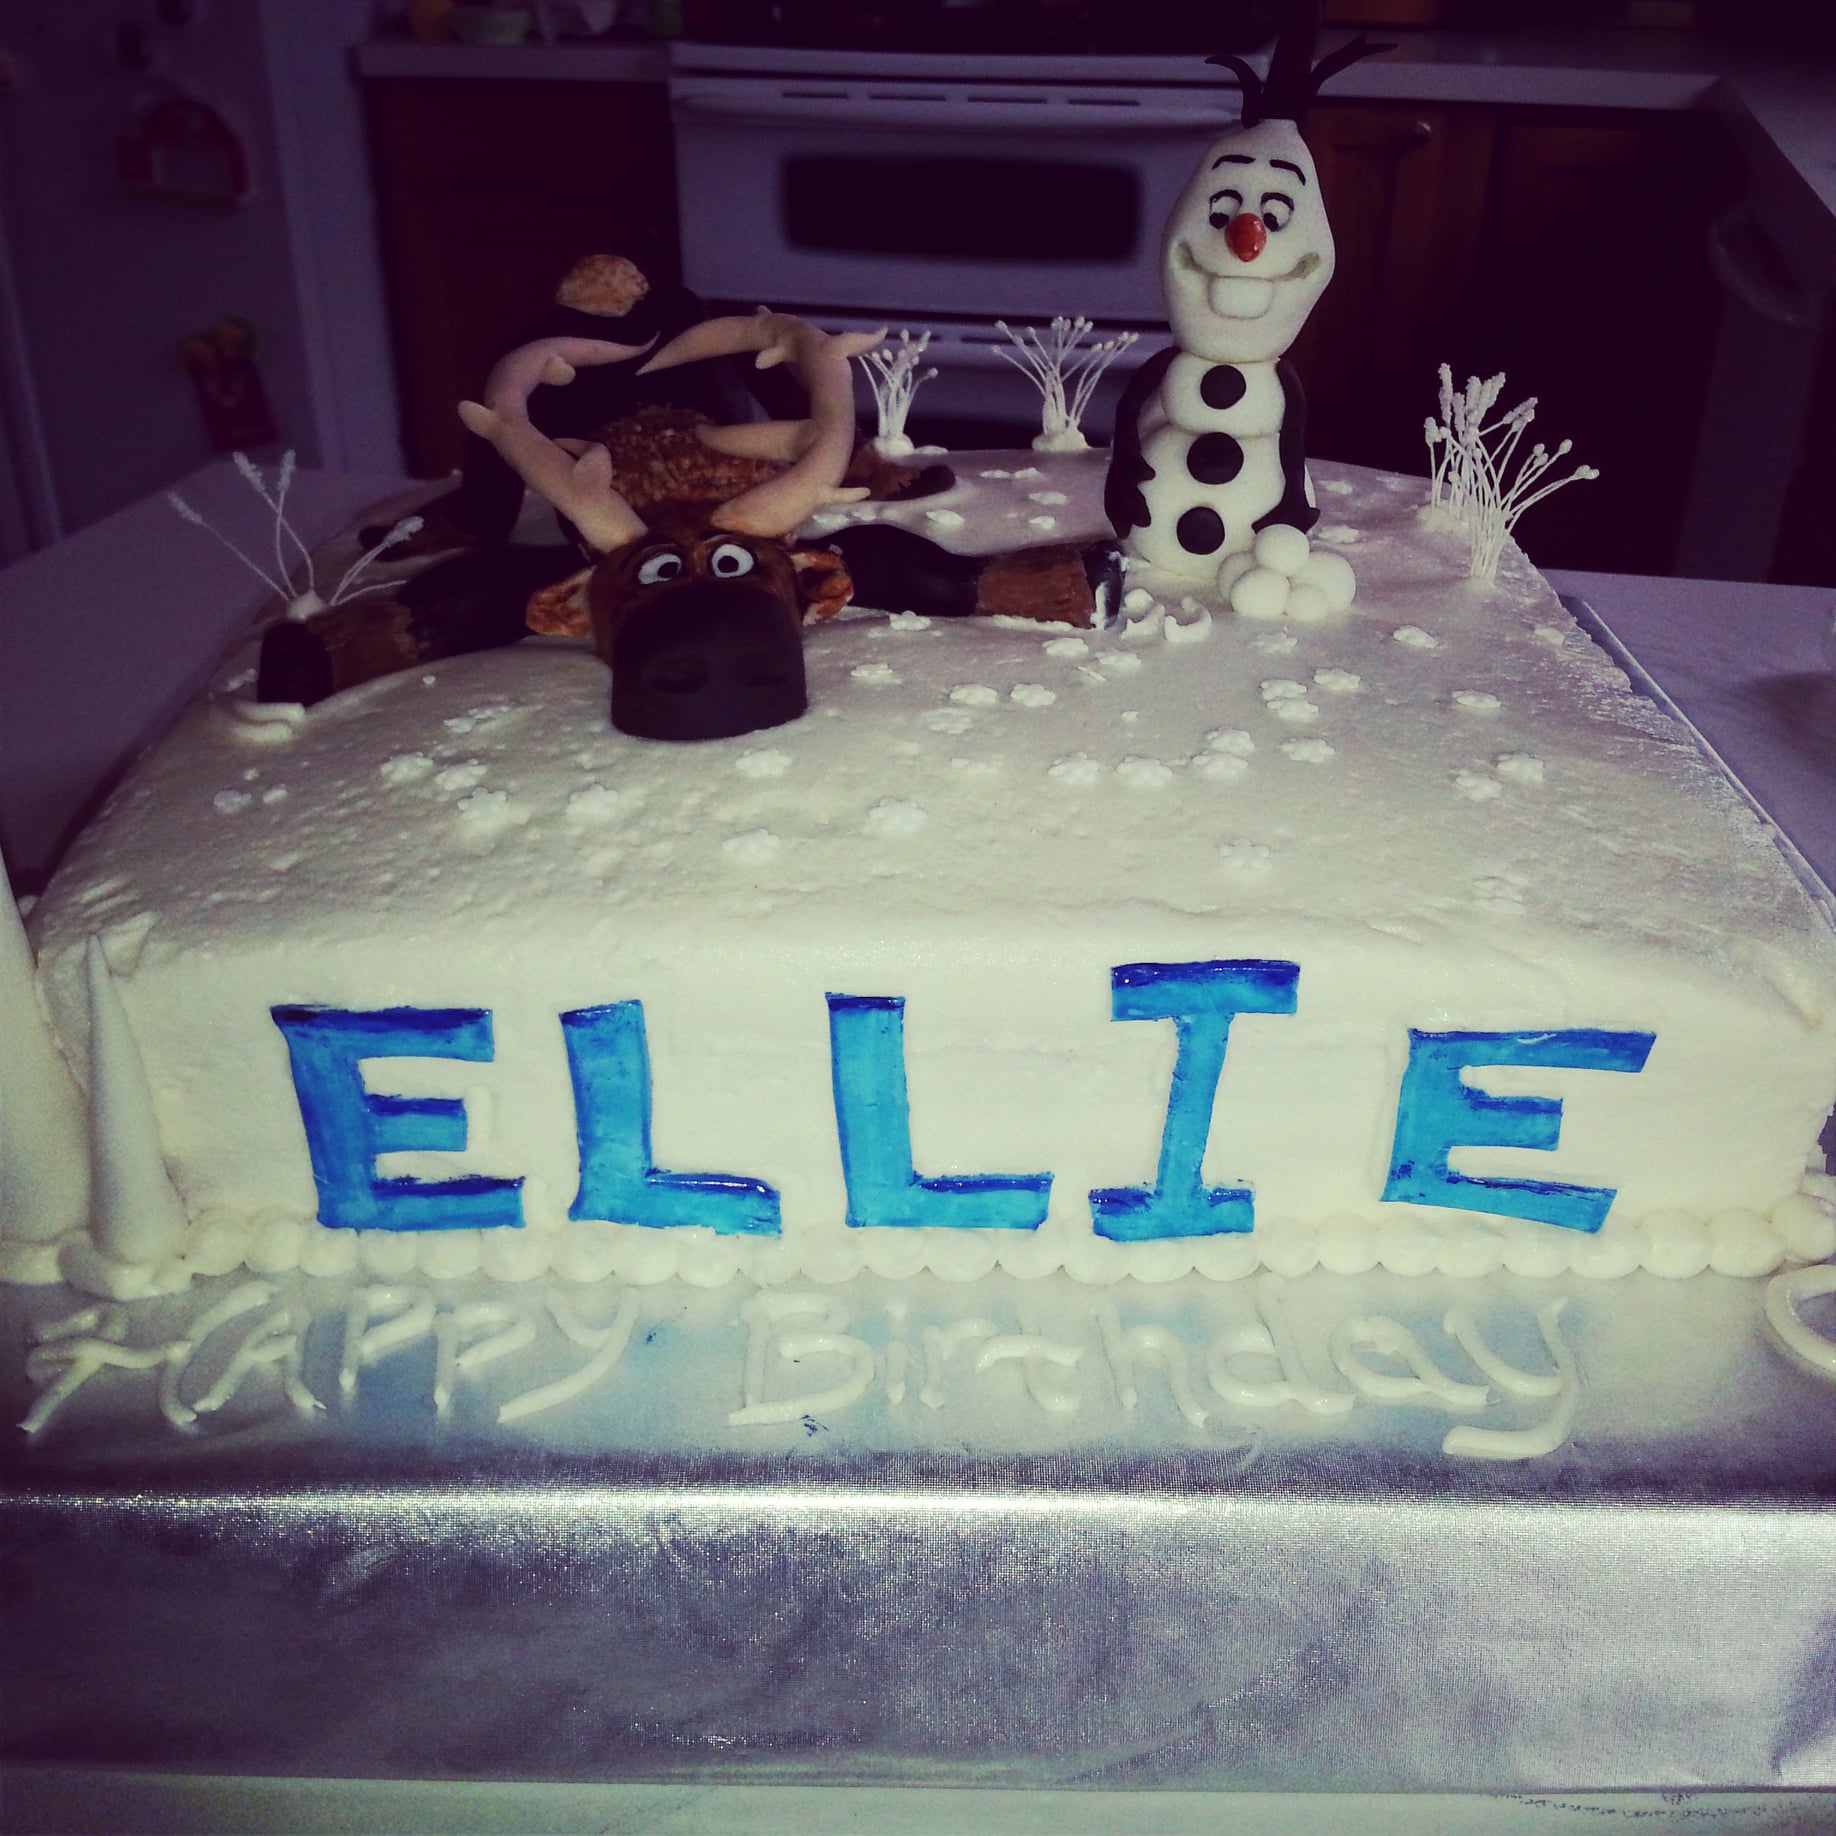 Customfrozen birthday cake with olaf and elsa on it.